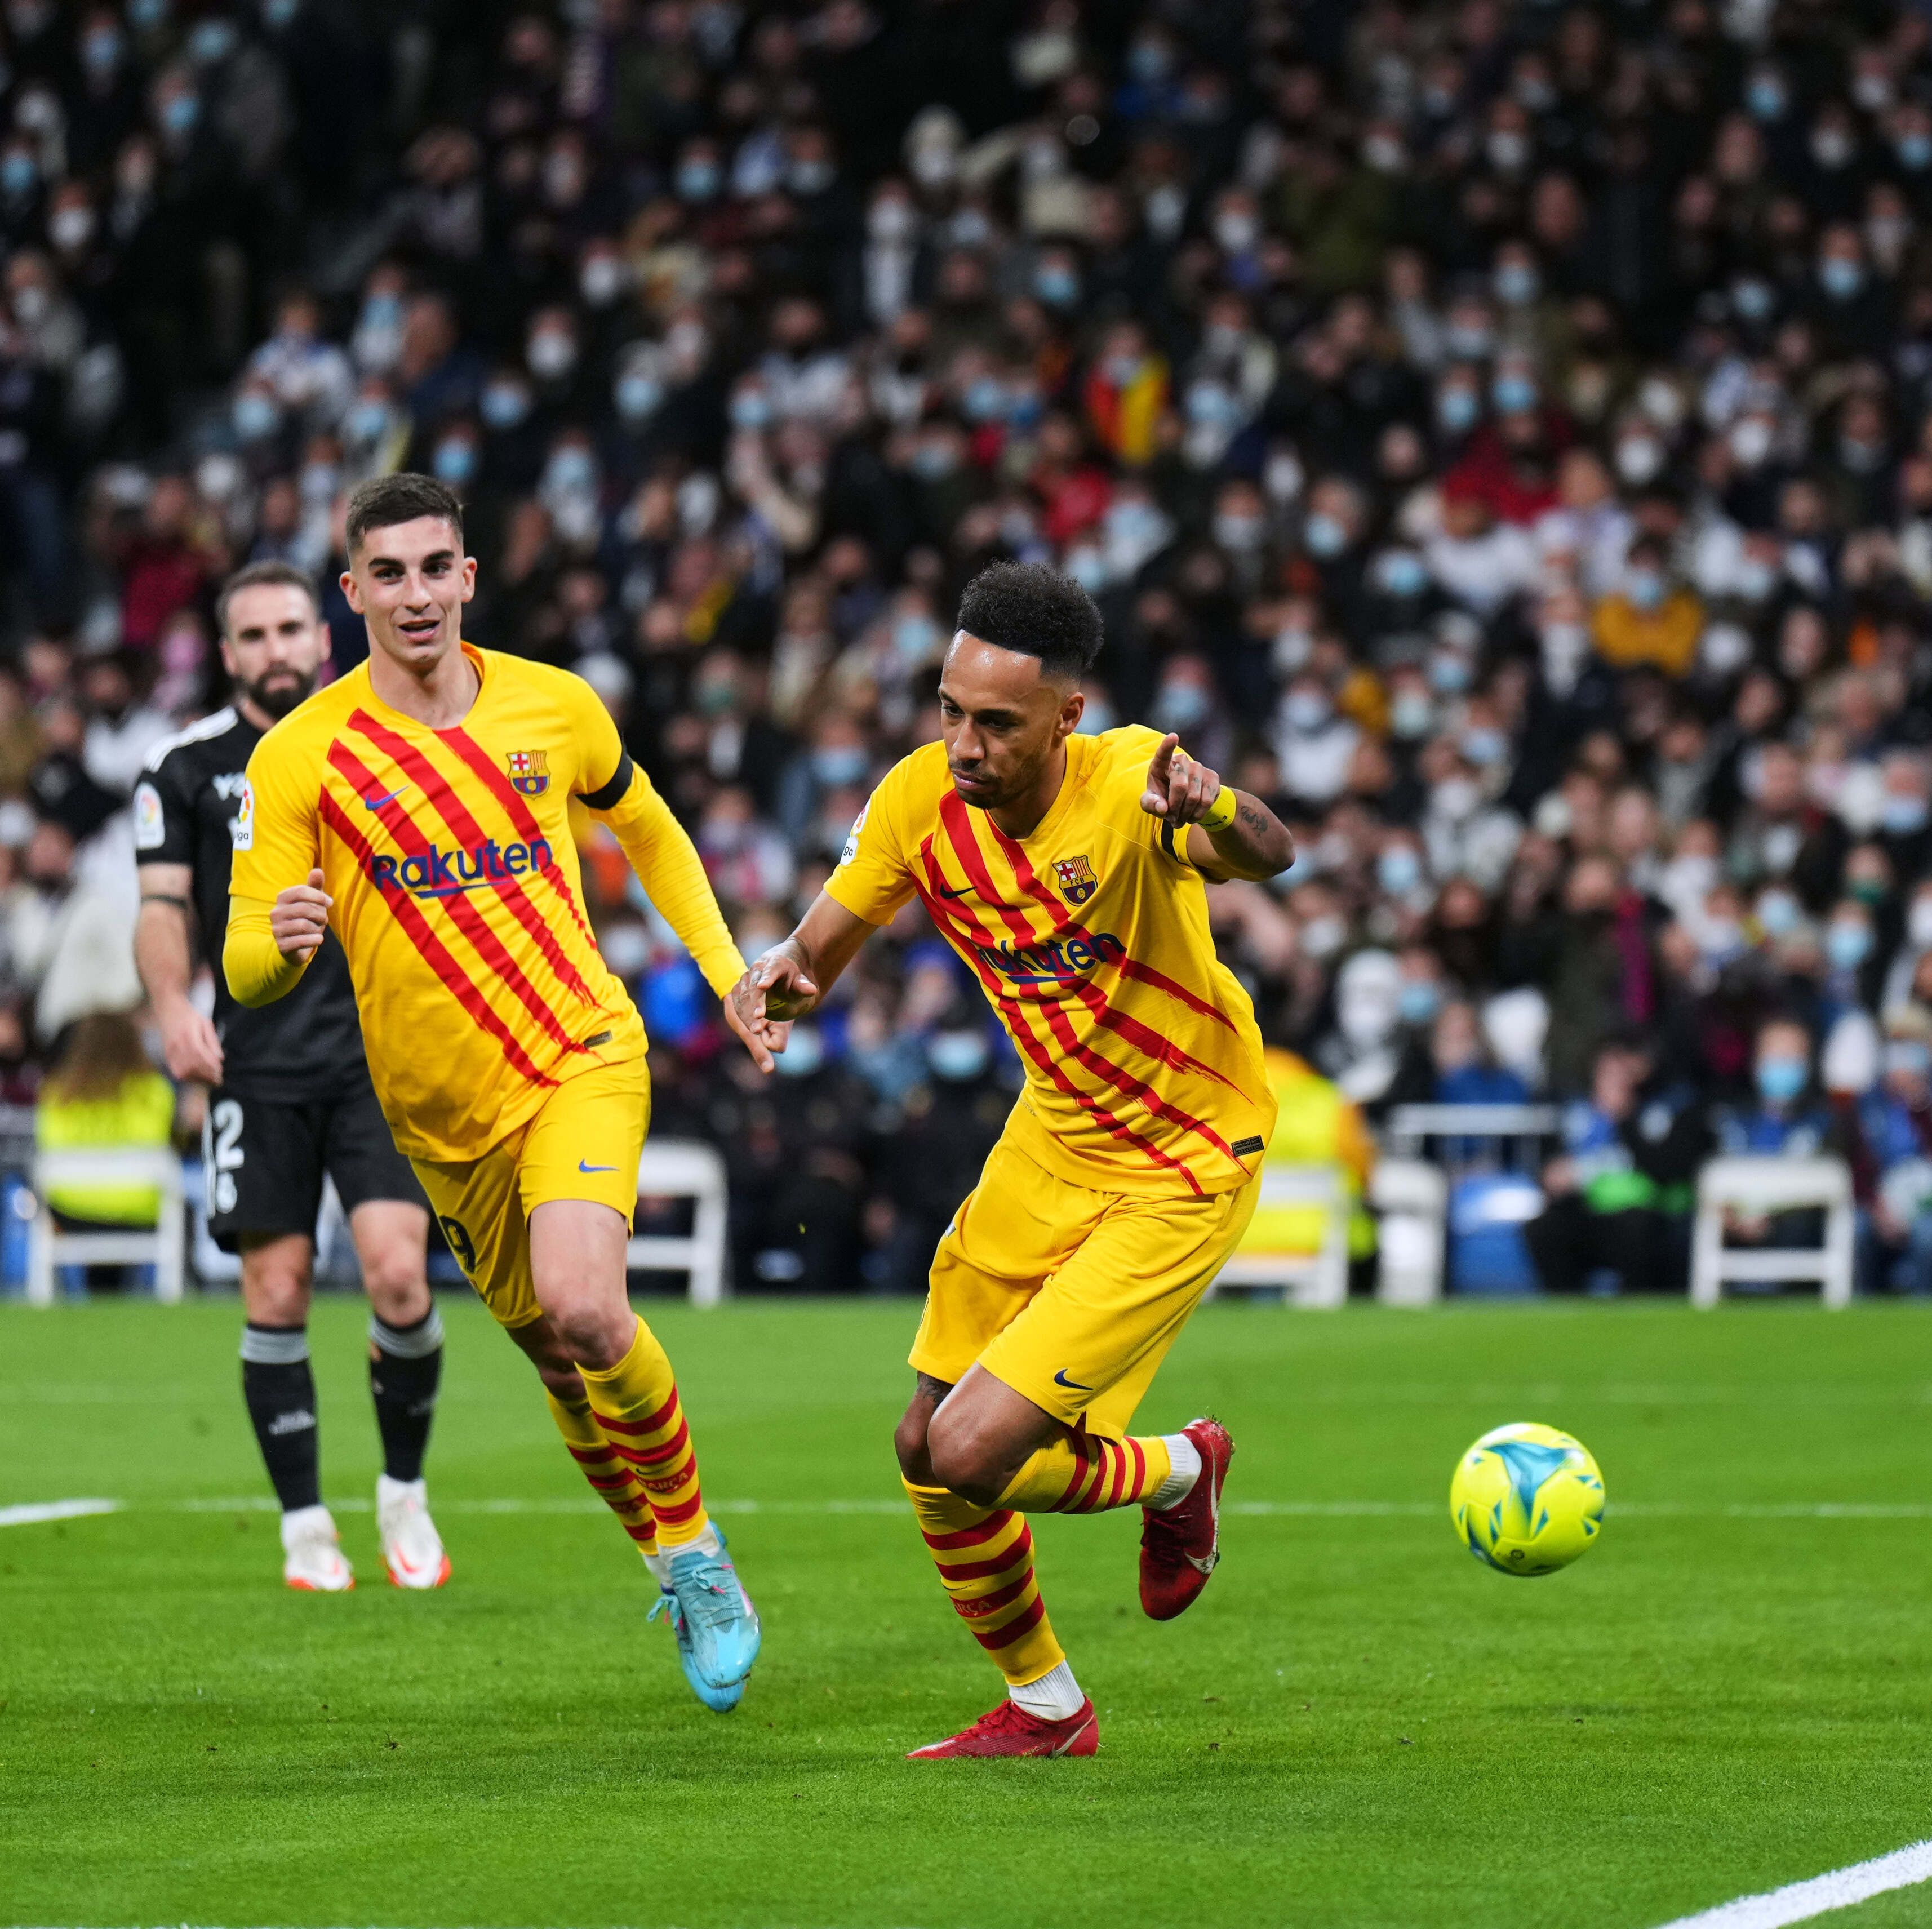 Real Madrid 0-4 Barcelona: Barcelona EMBARRASS Real Madrid with a 4-0 victory at the Santiago Bernabeu in El Clasico as in-form Aubameyang scores a brace